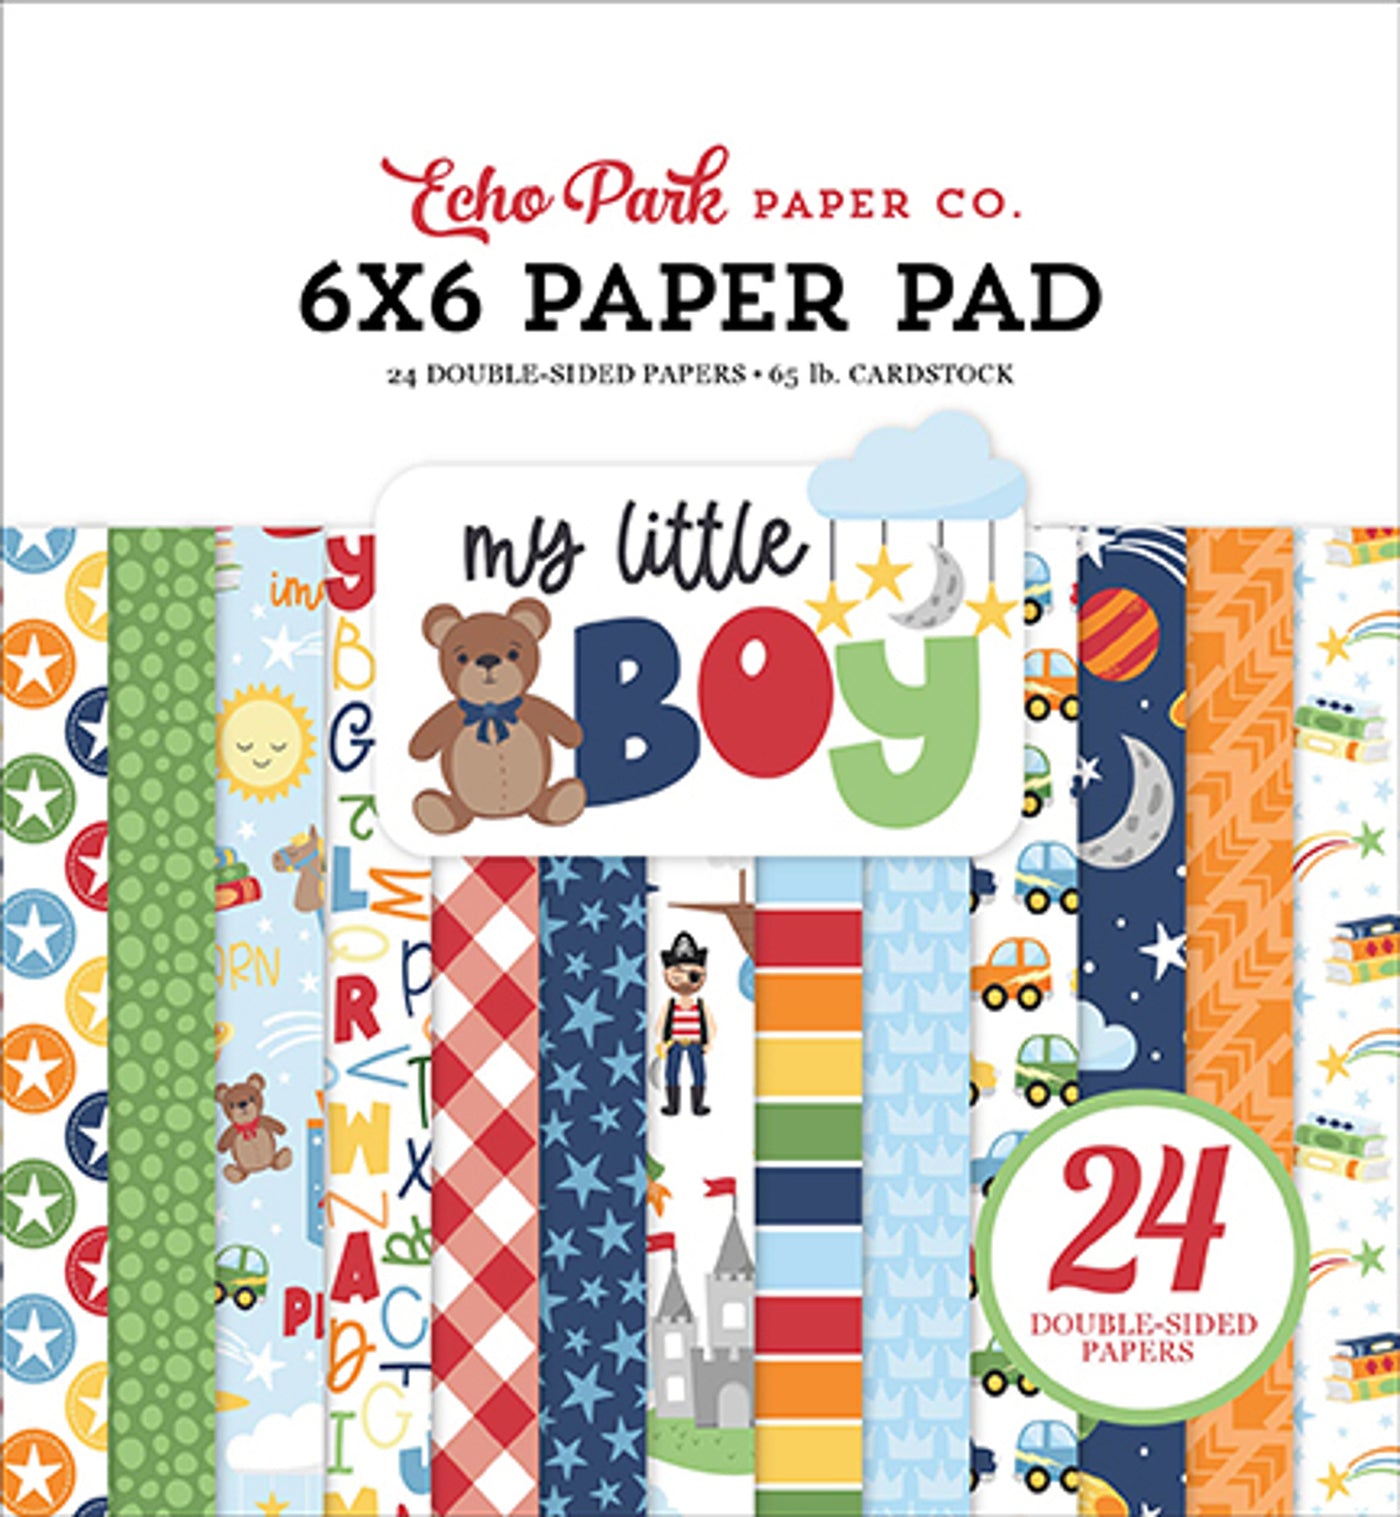 The 6x6 pad features cute designs and colors to celebrate the love for a little boy! Fun for cards and papercrafts. Includes 24 double-sided pages.